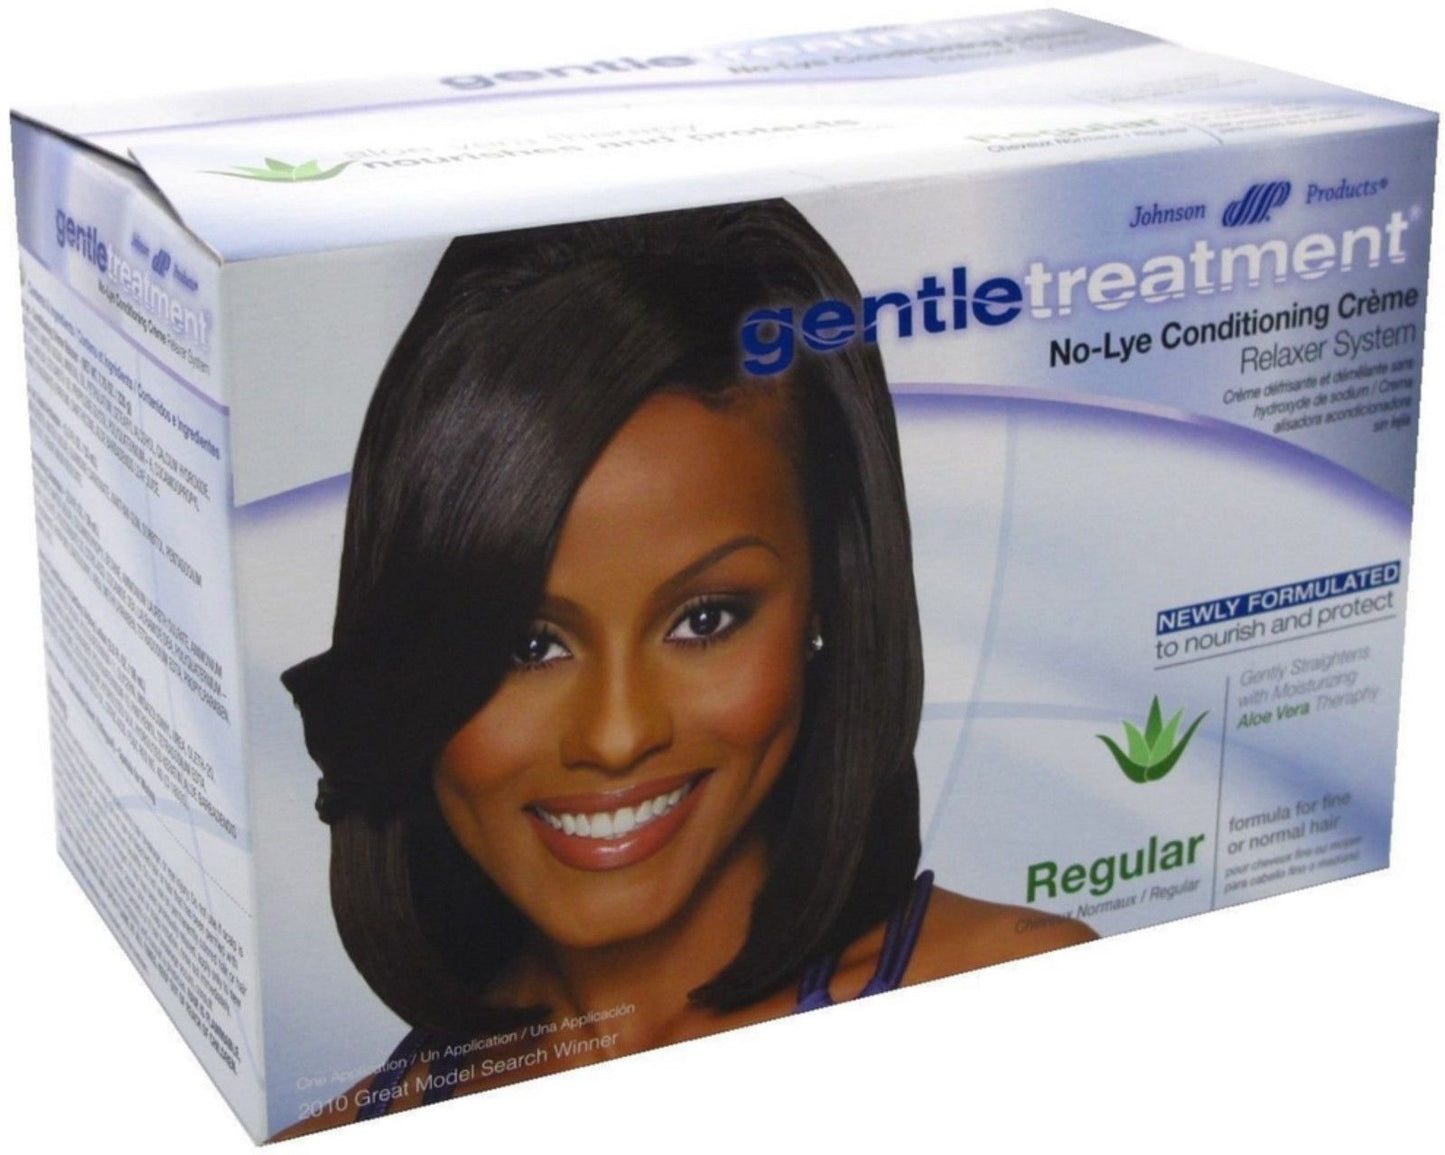 Gentle Treatment No-Lye Conditioning Creme Relaxer System - 530g